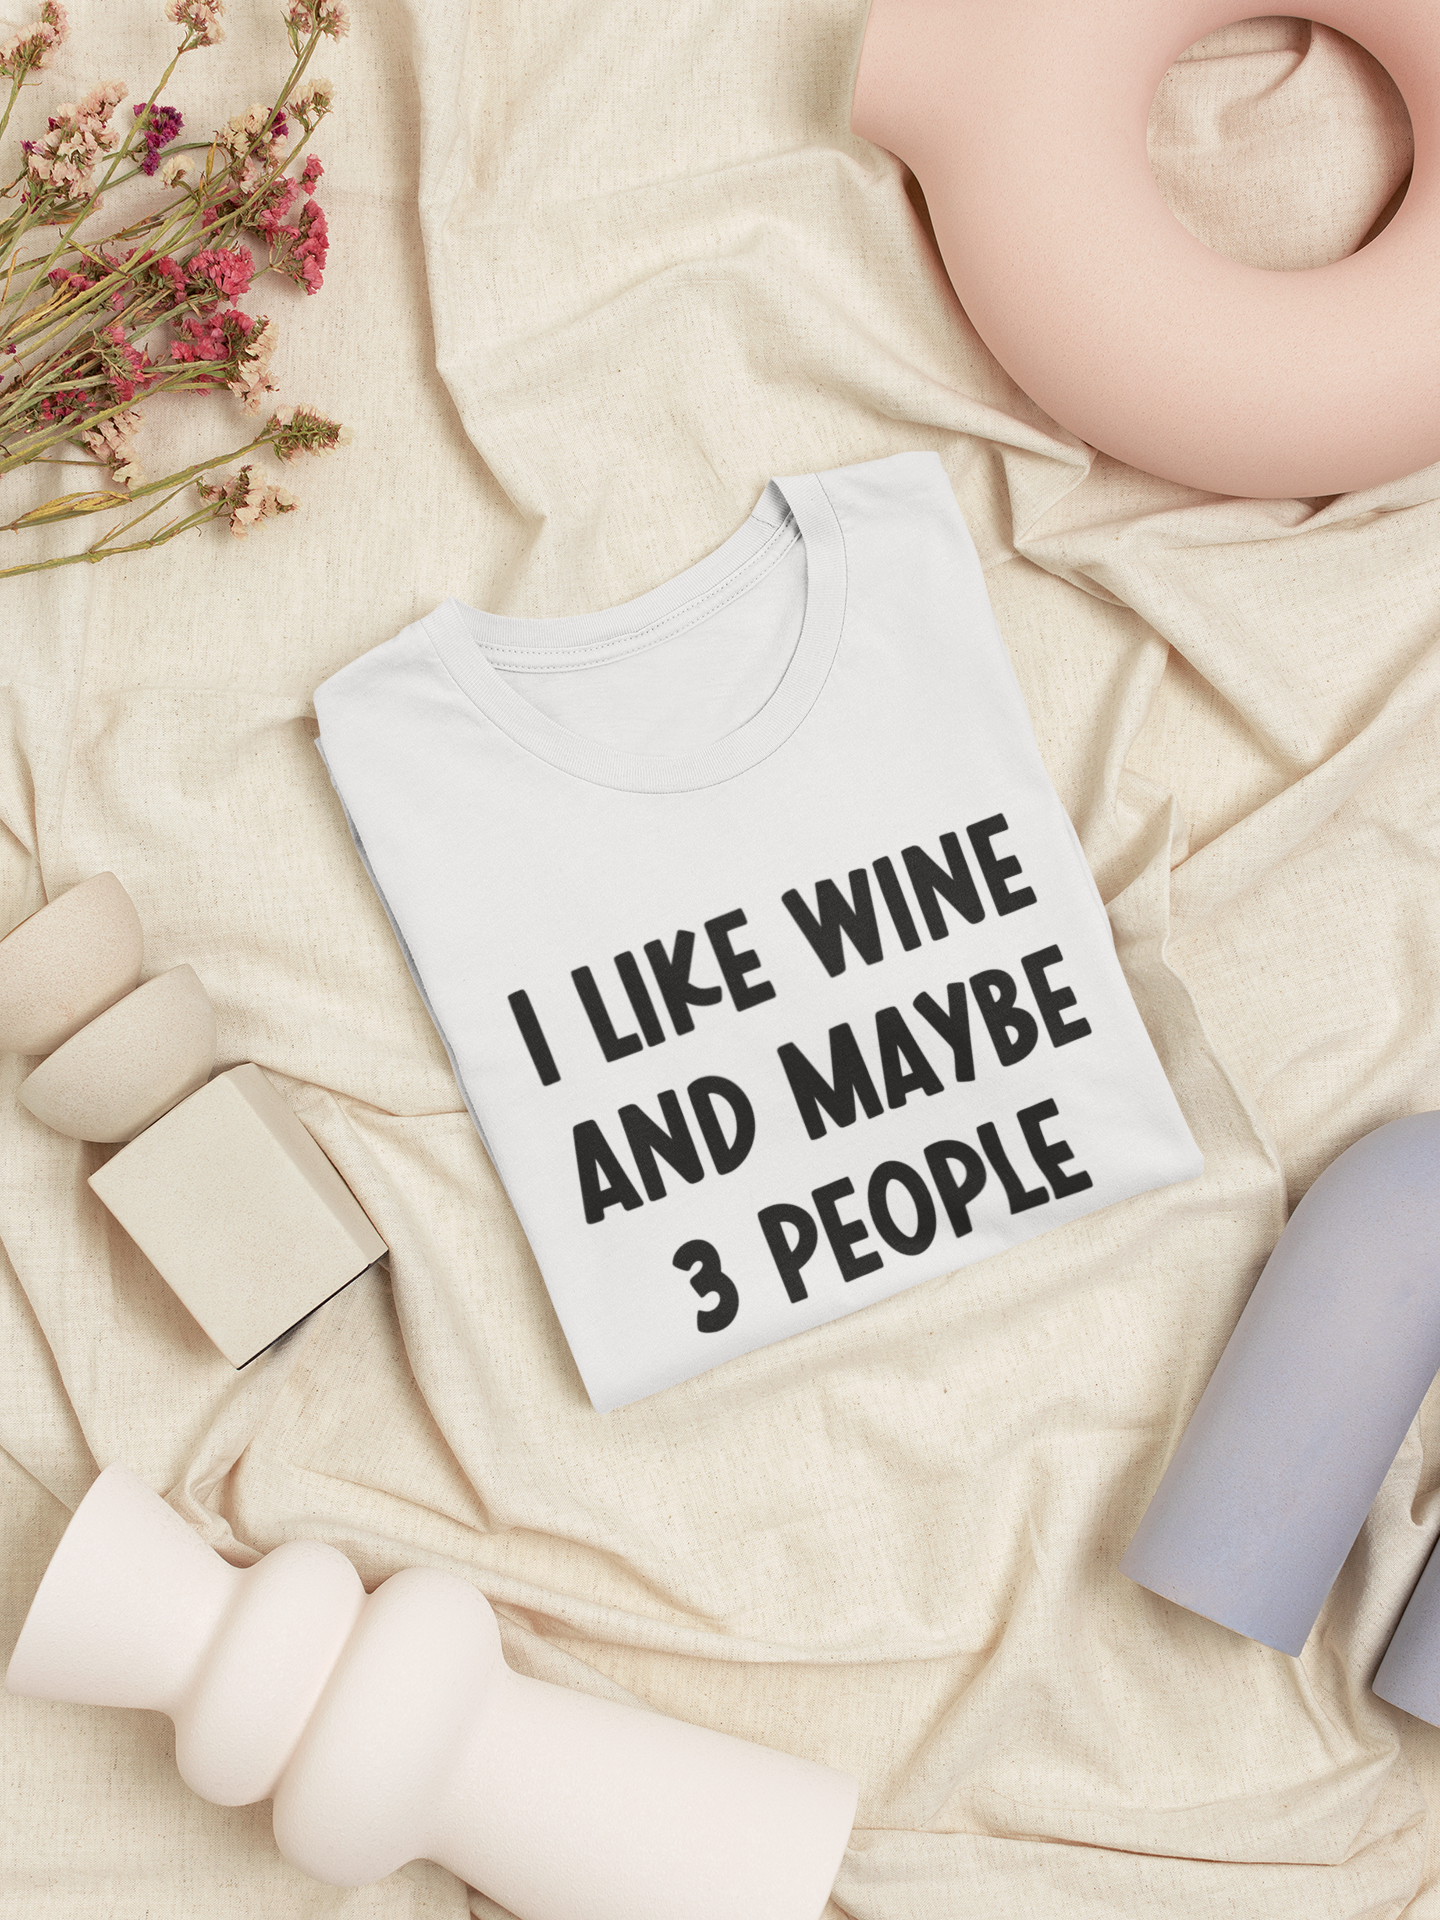 I Like Wine & Maybe 3 People - White T-Shirt in black writing. This is an image of the t-shirt folded in a square on a cream blanket, with a stringy pink flower and cream, blush pink, and light blue objects next to it.